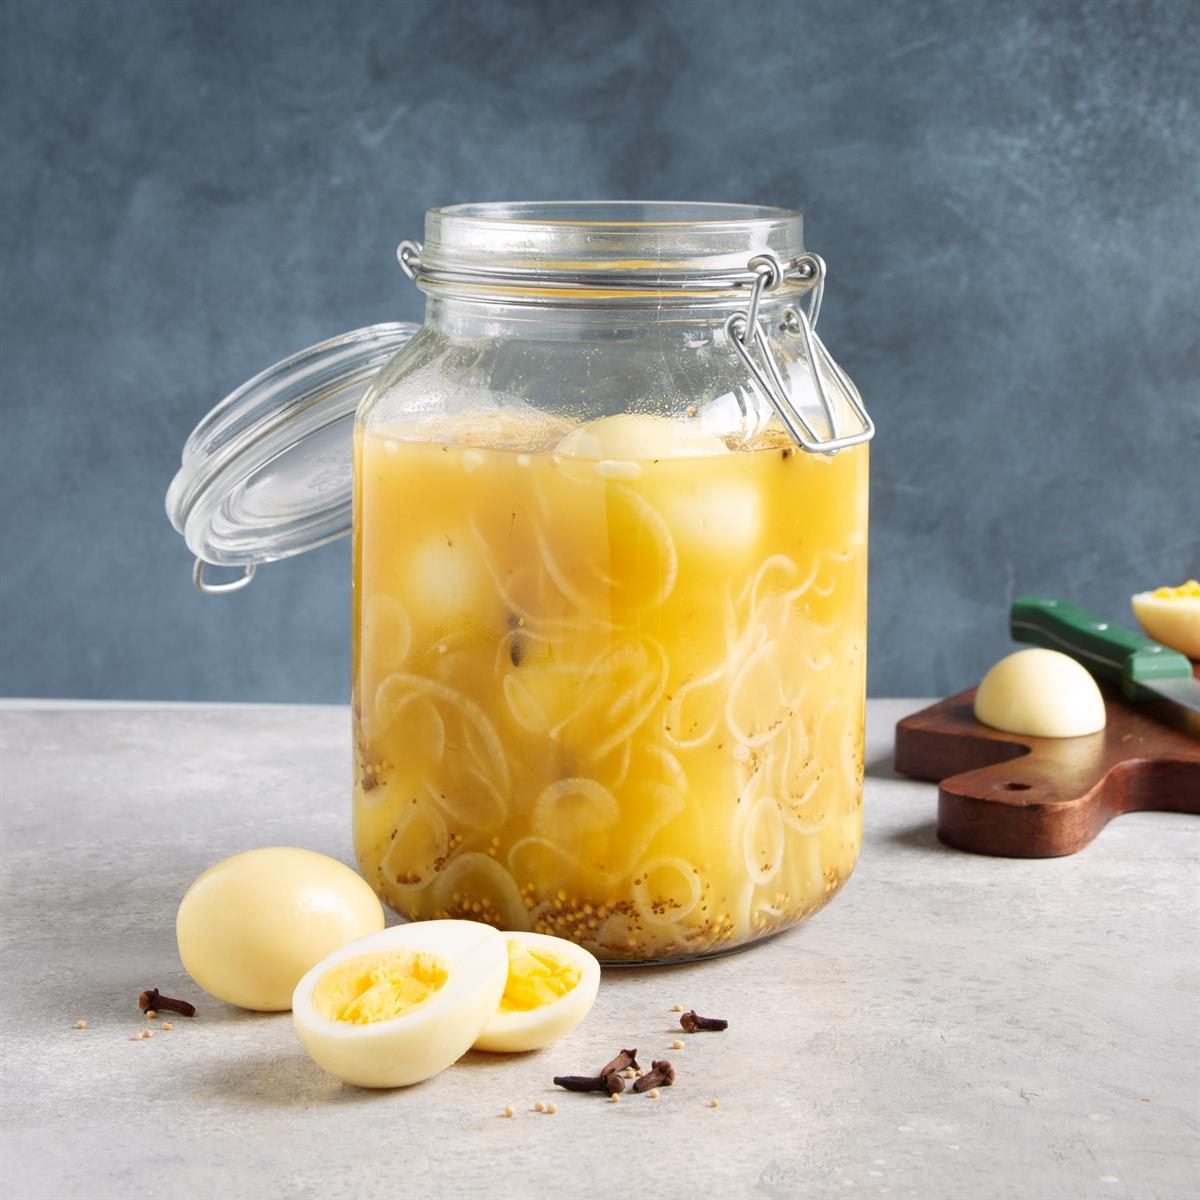 German Style Pickled Eggs Exps Ft21 29261 F 0827 1